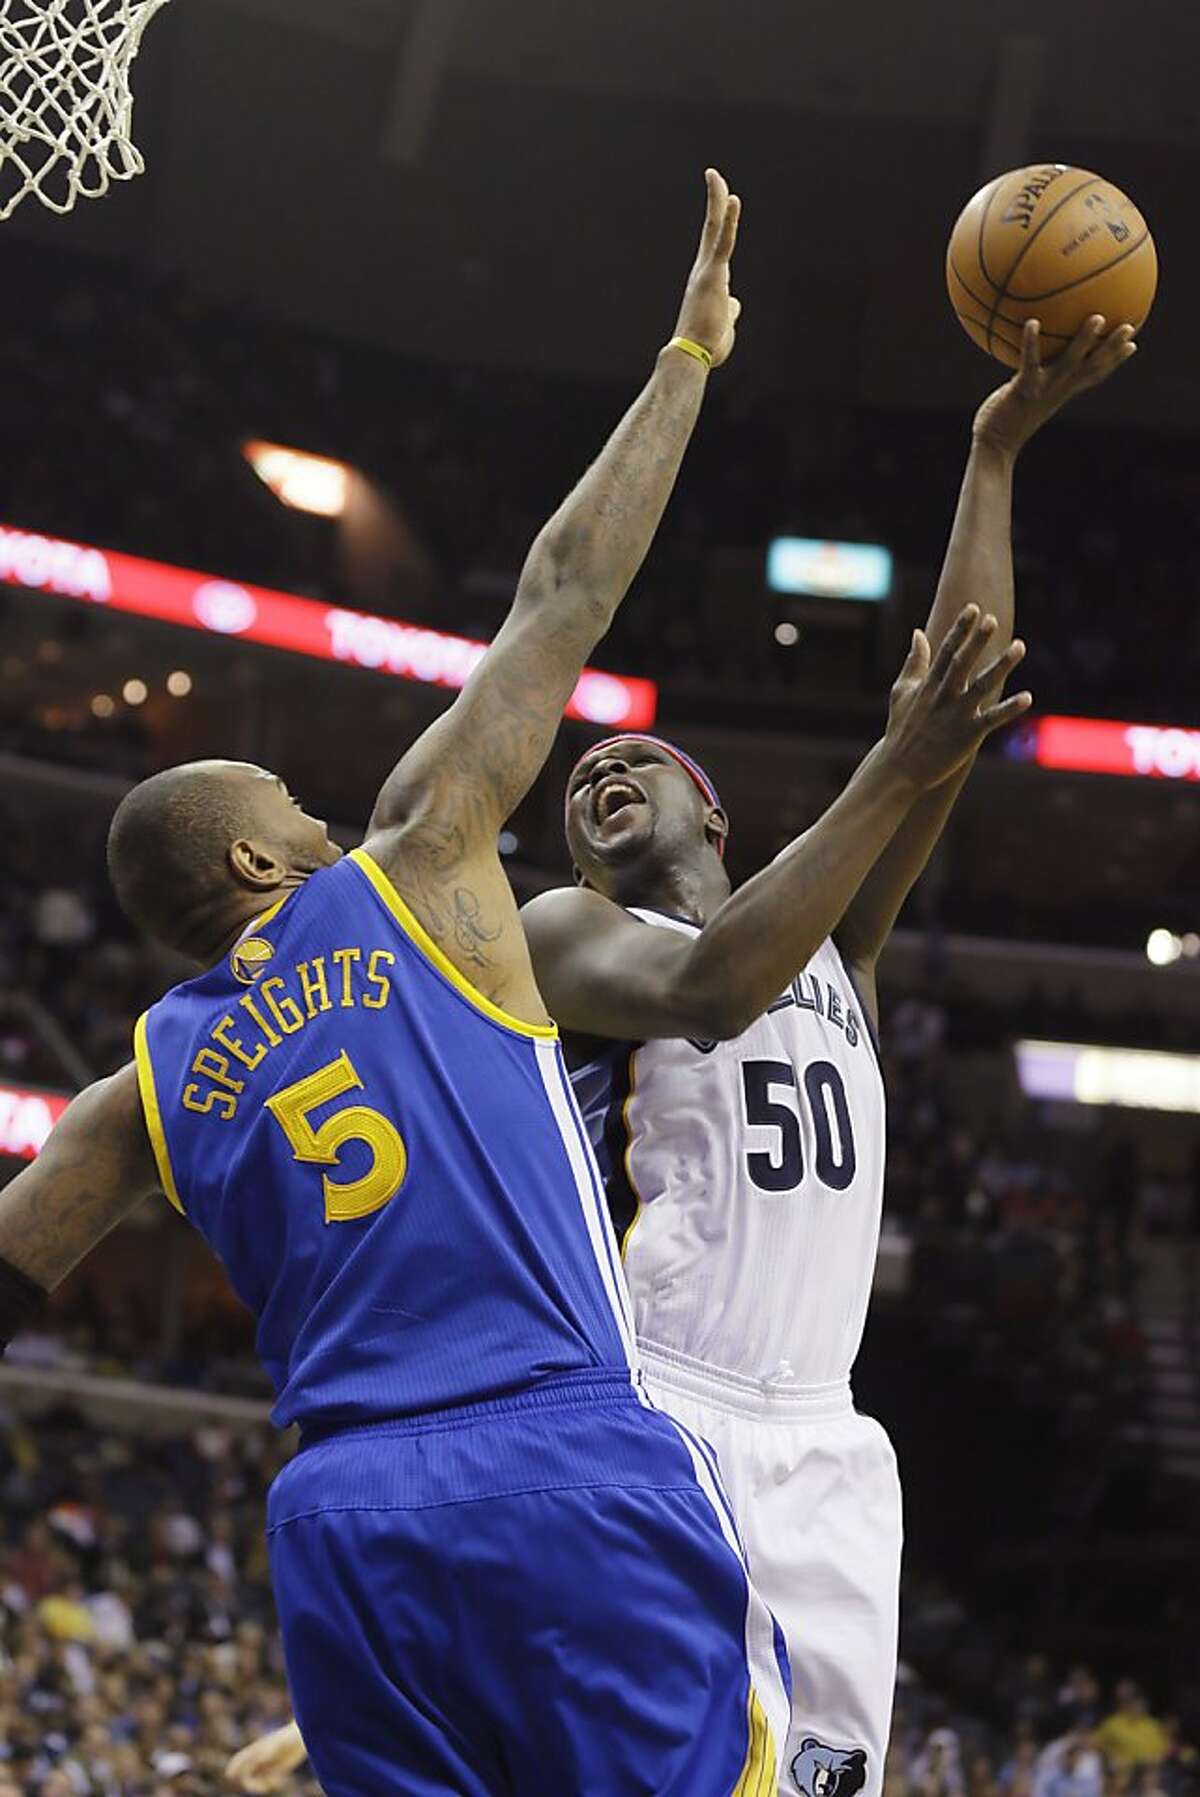 Memphis Grizzlies' Zach Randolph (50) shoots over Golden State Warriors' Marreese Speights (5) in the second half of an NBA basketball game in Memphis, Tenn., Saturday, Nov. 9, 2013. Randolph scored 23 points in the Grizzlies 108-90 victory over the Warriors. (AP Photo/Danny Johnston)